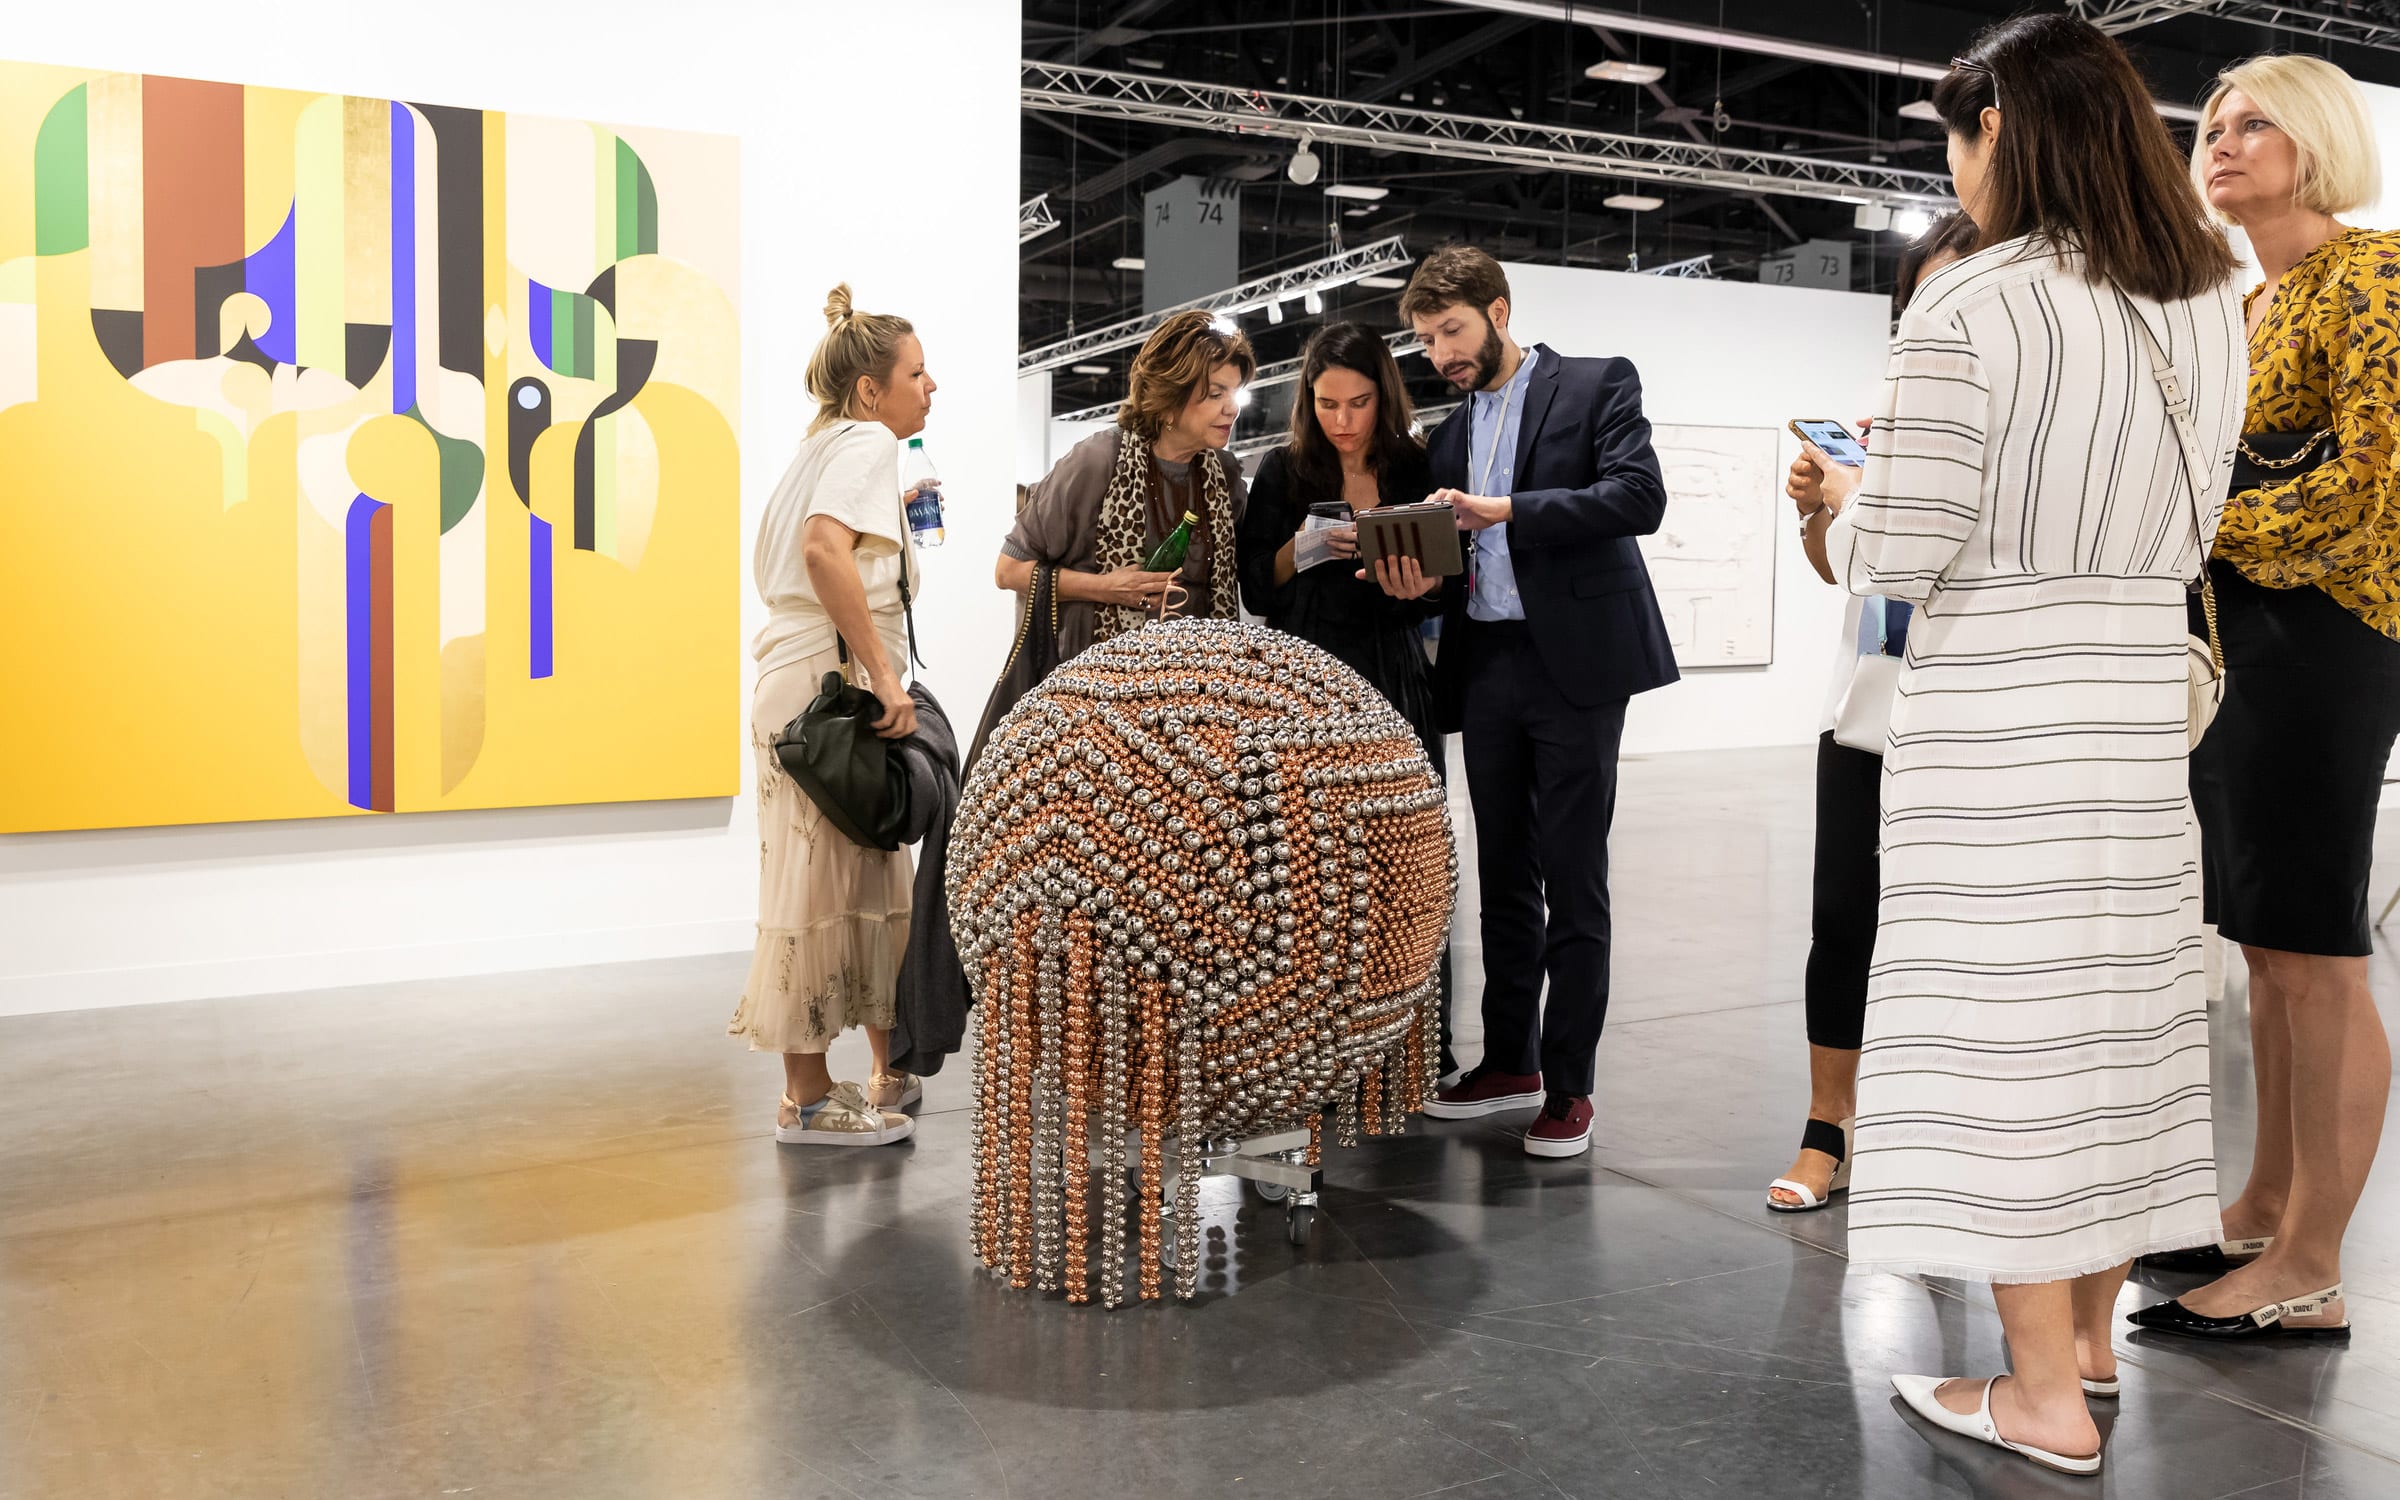 Visitors at the booth of Galerie Chantal Crousel (D22).